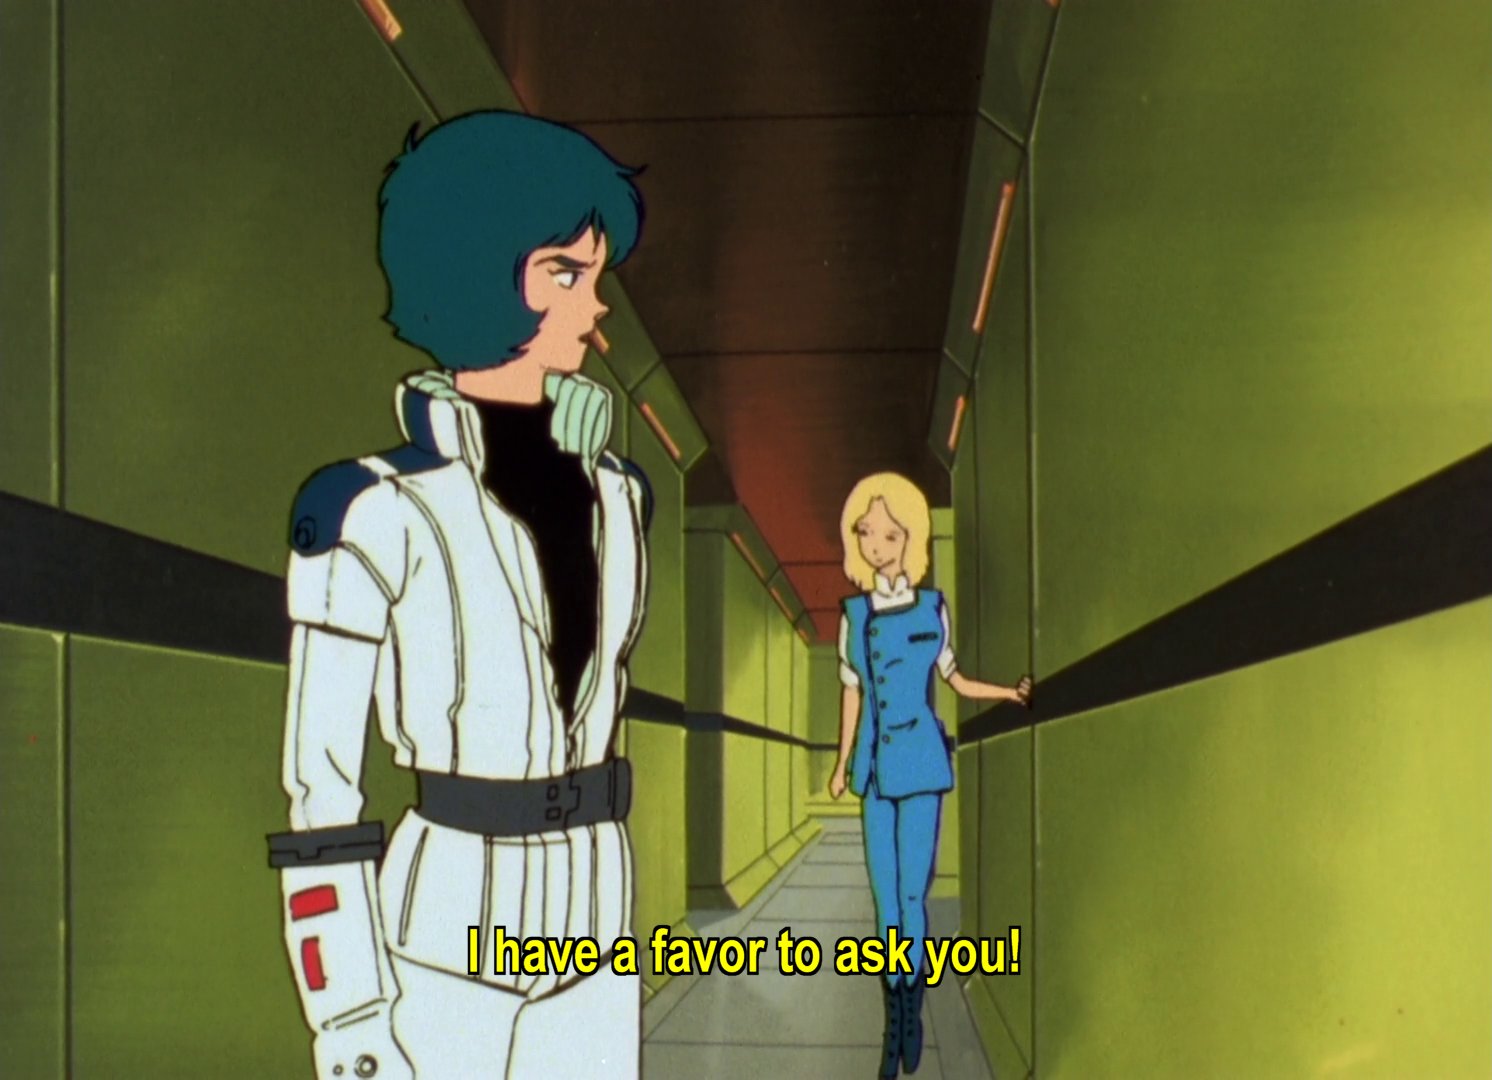 Beltorchika approaching Kamille in the halls: I have a favor to ask you!